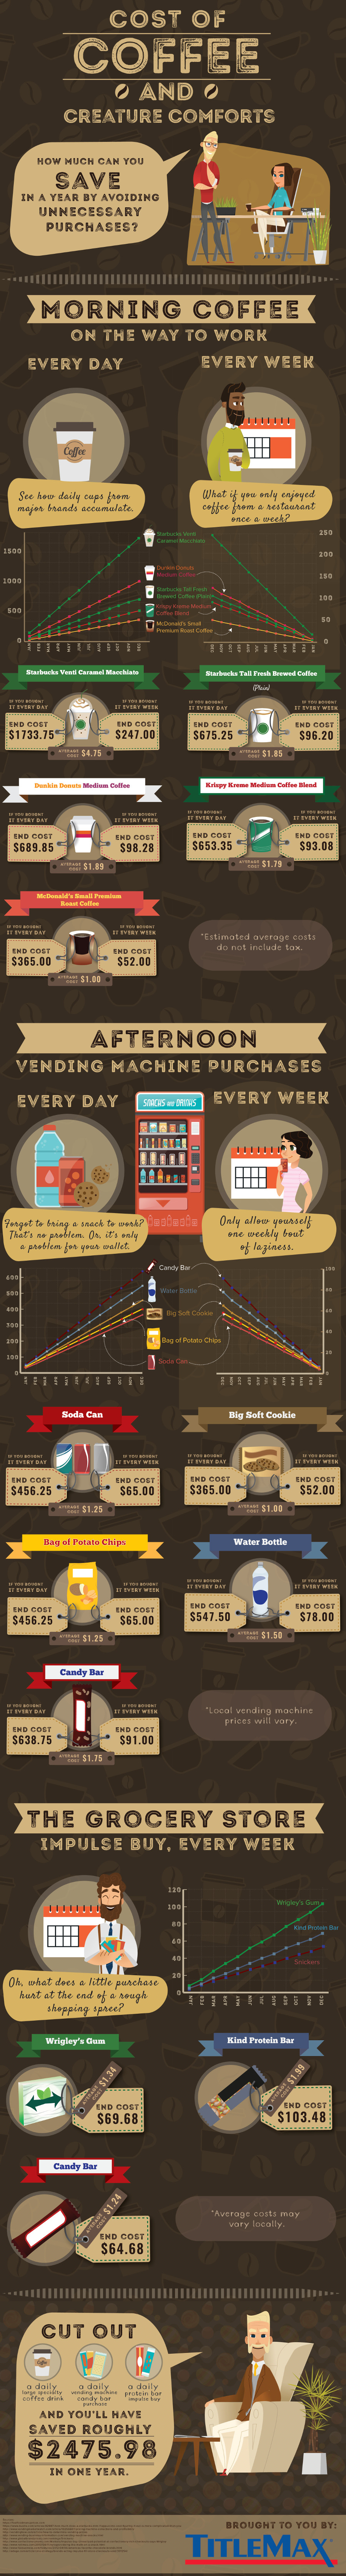 Is Your Morning Coffee Emptying Your Savings? - Infographic